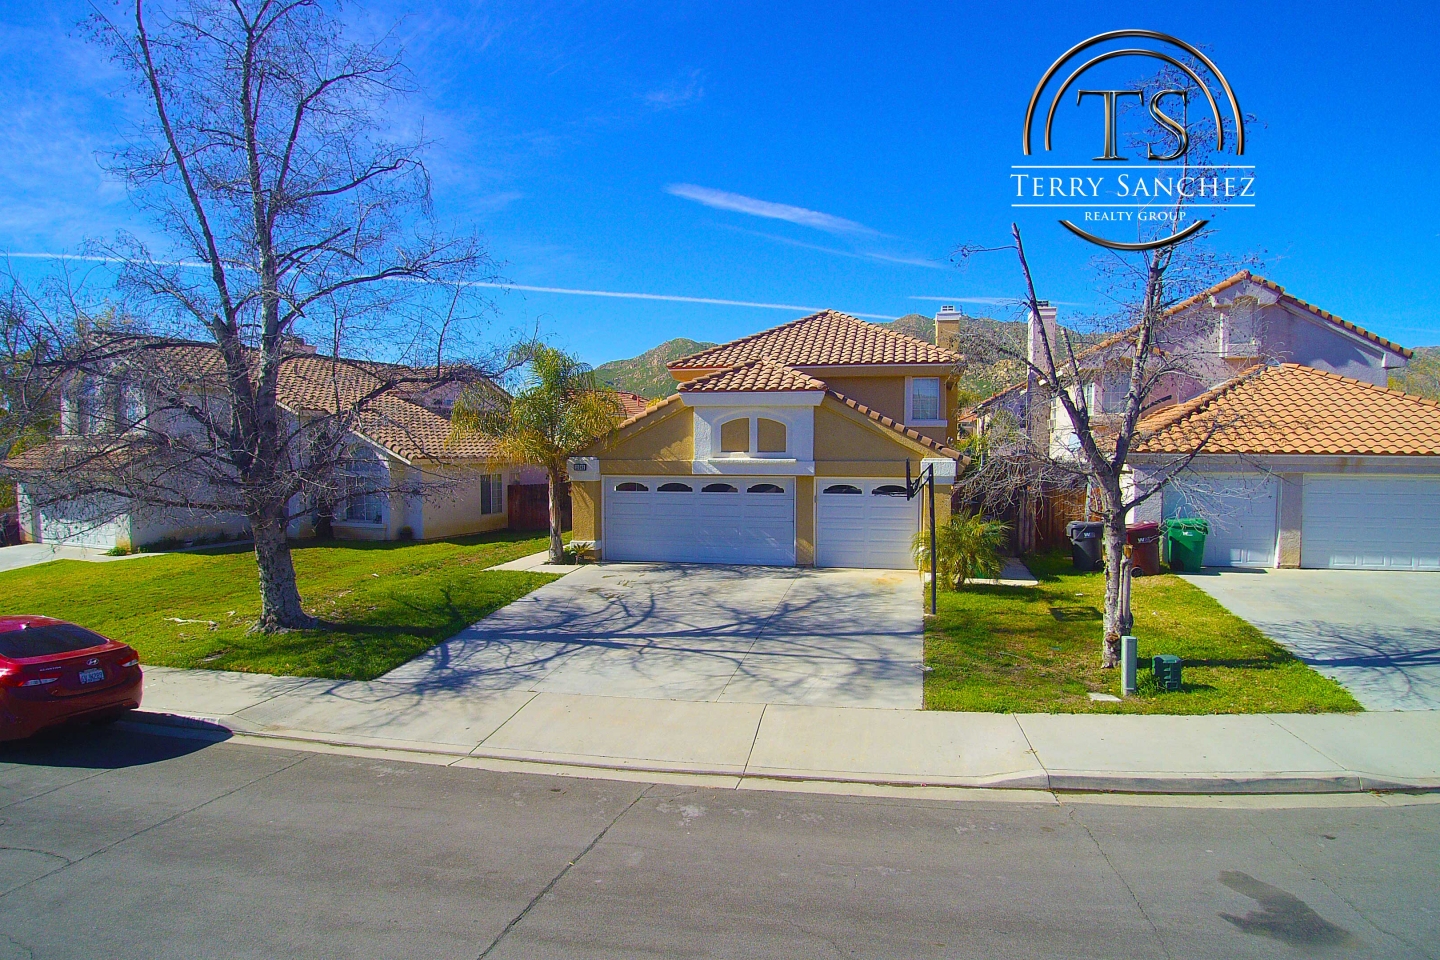 HOME FOR SALE IN MORENO VALLEY CA 92557 BY REAL ESTATE BROKER TERRY SANCHEZ $310,000 WITH 4 BEDROOMS 3 BATHROOMS